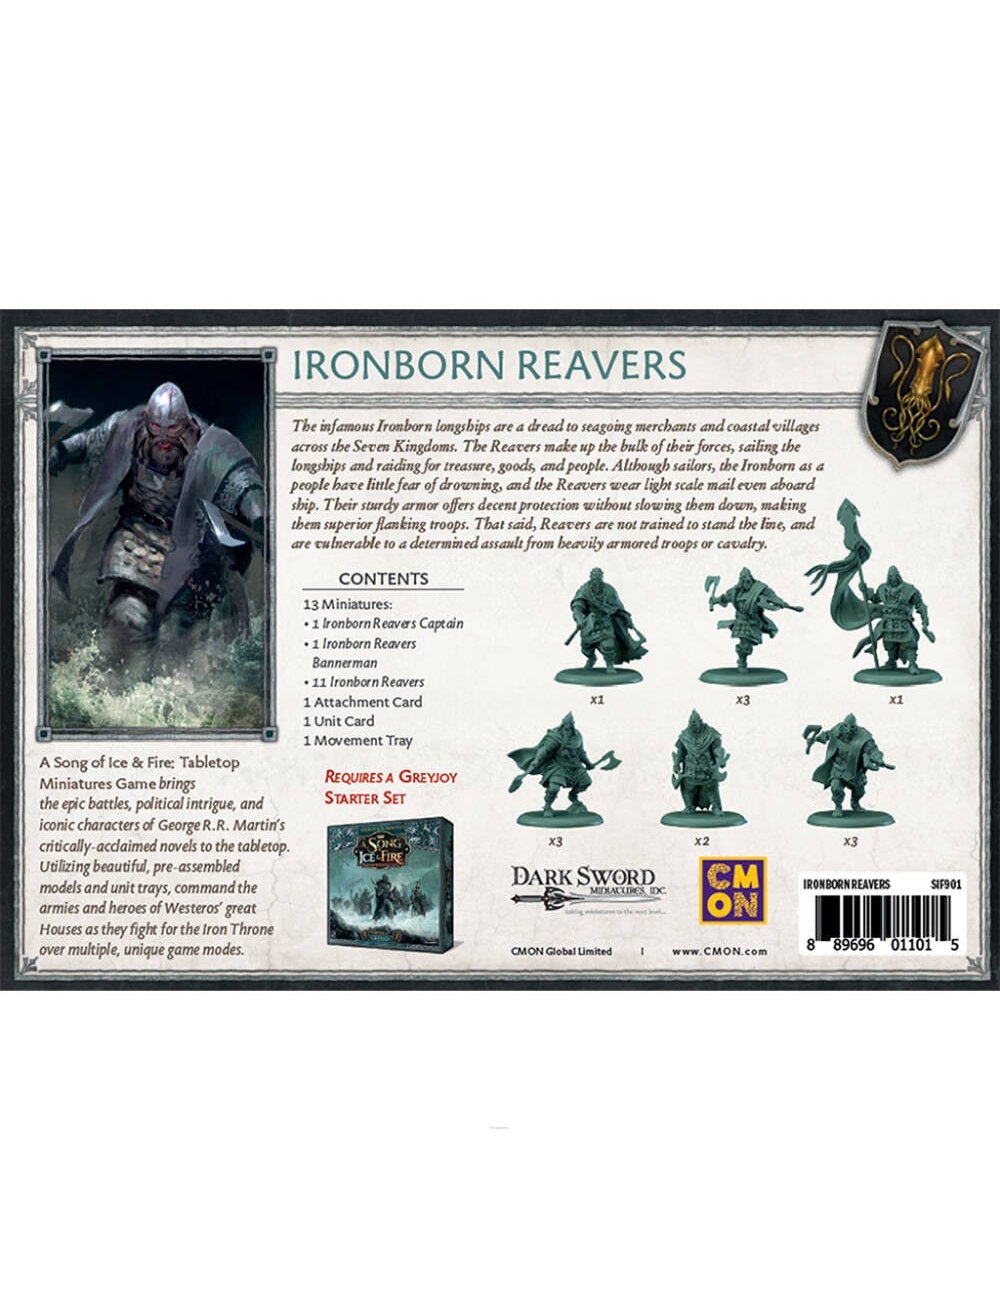 A SONG OF ICE & FIRE - Greyjoy Ironborn Reavers PL